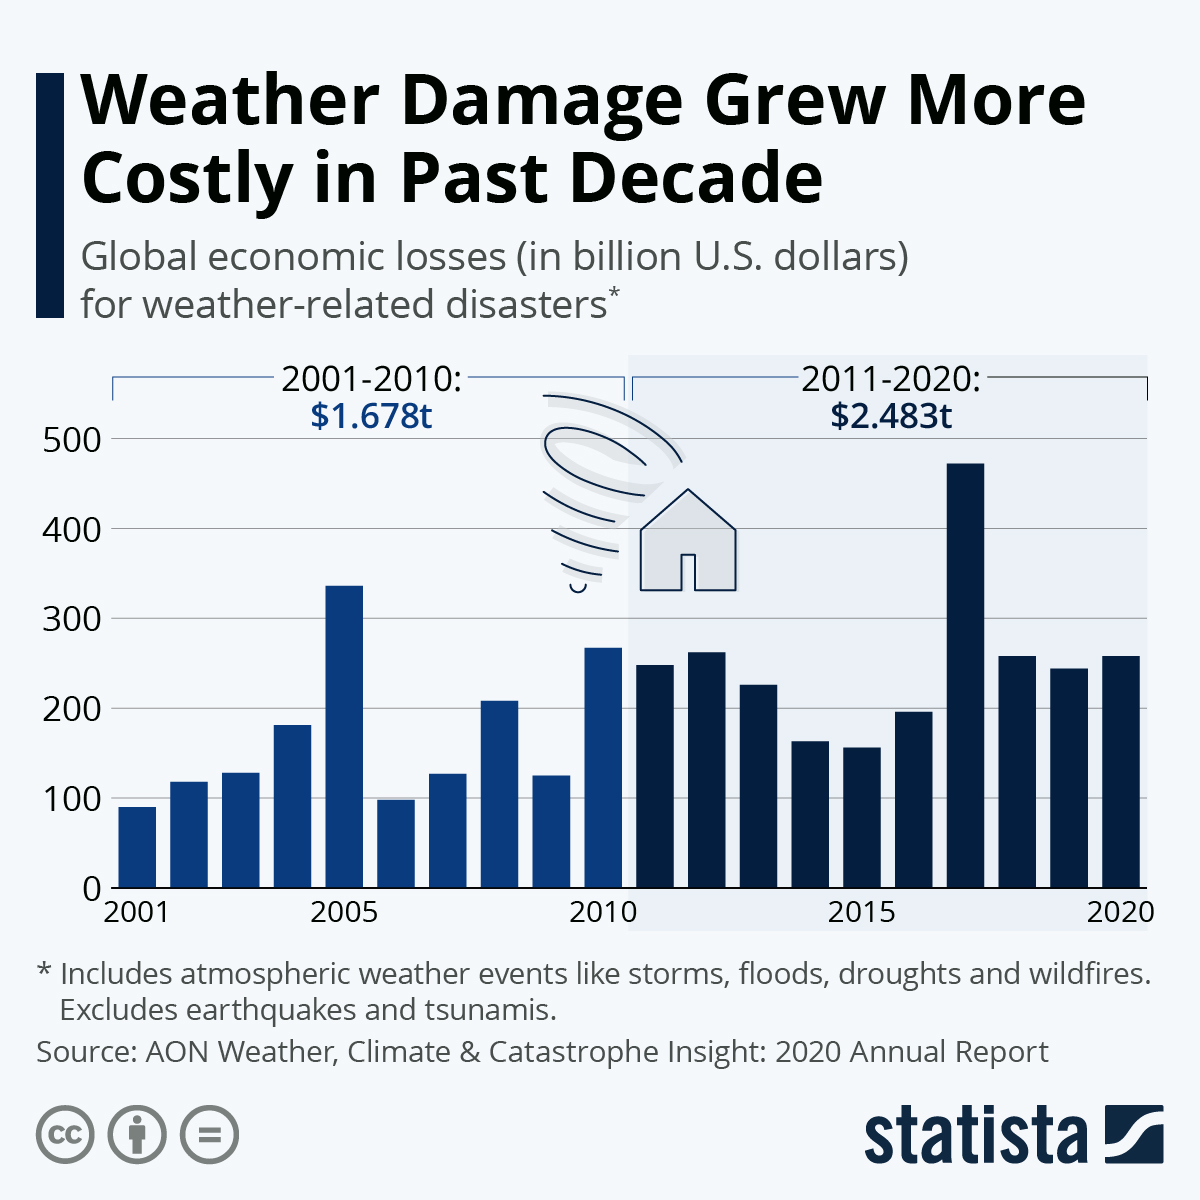 Weather Damage Grew More Costly in Past Decade